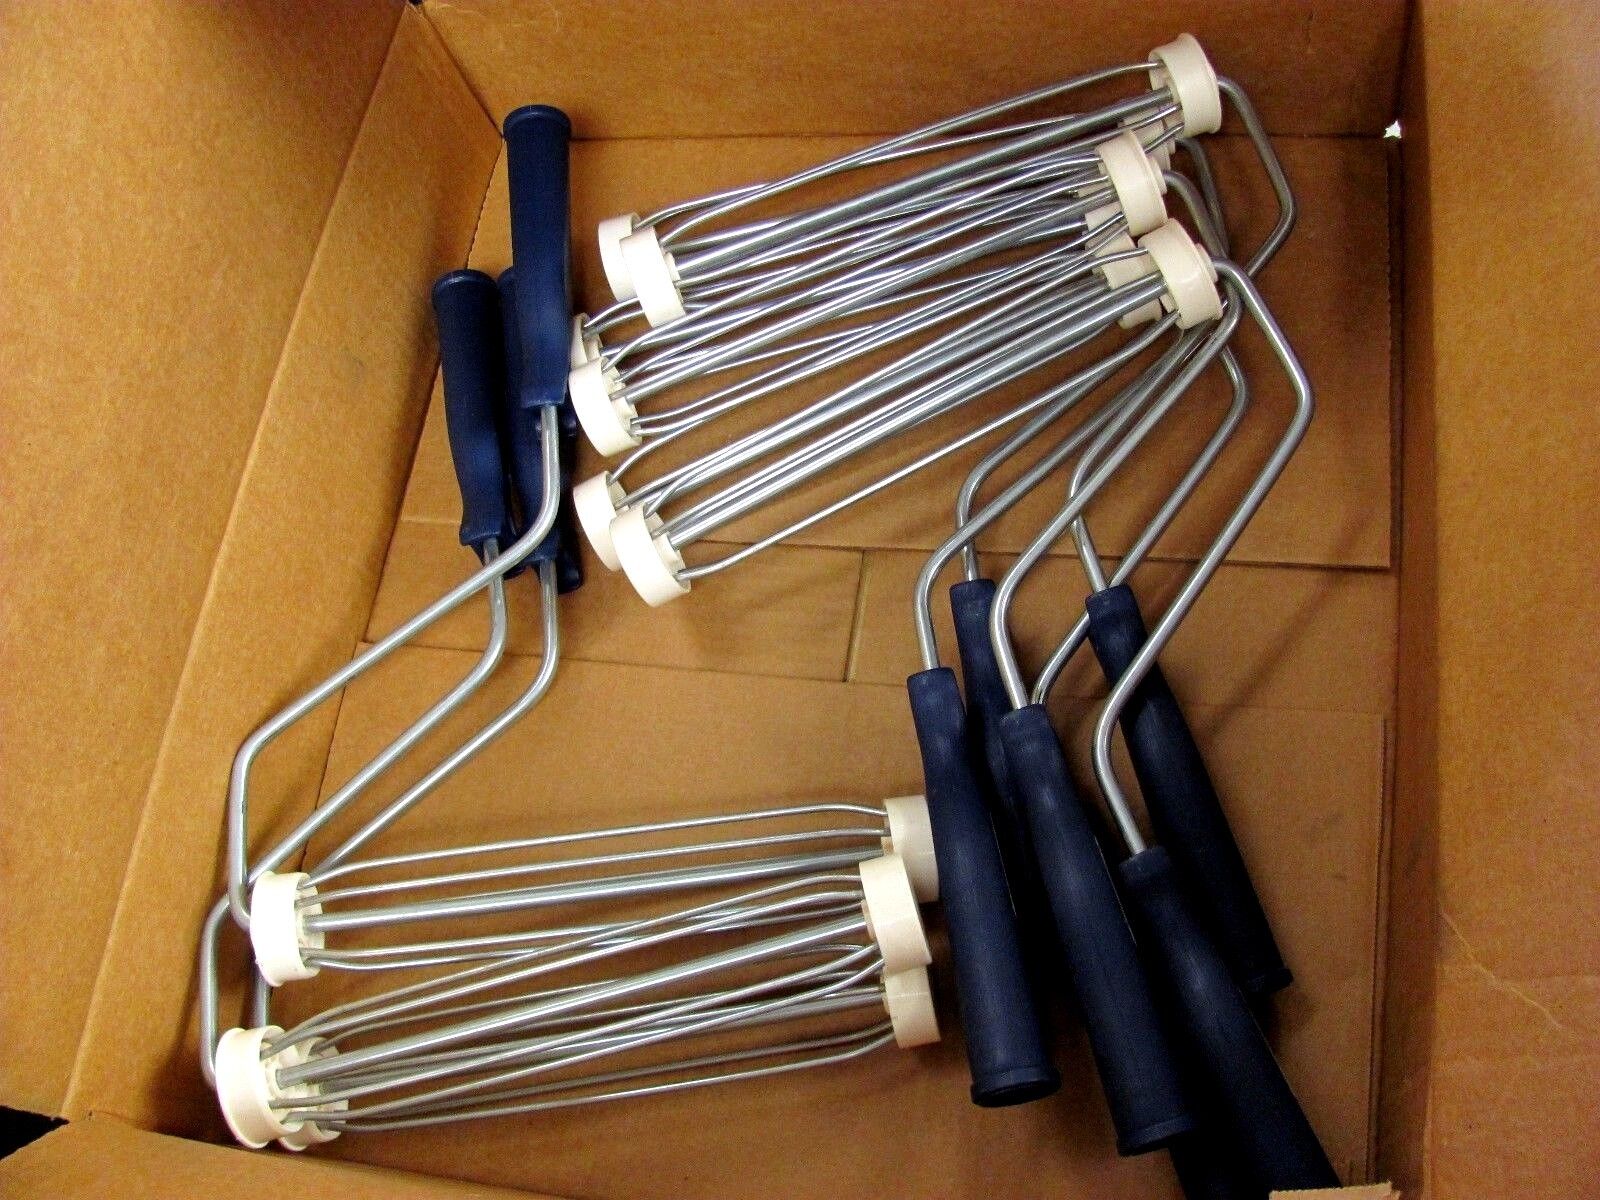 Wooster Brush Co R030-9 9" Utility Cage Roller Frame Case of 12 - Blue Handles Wooster Brush Co R030-9